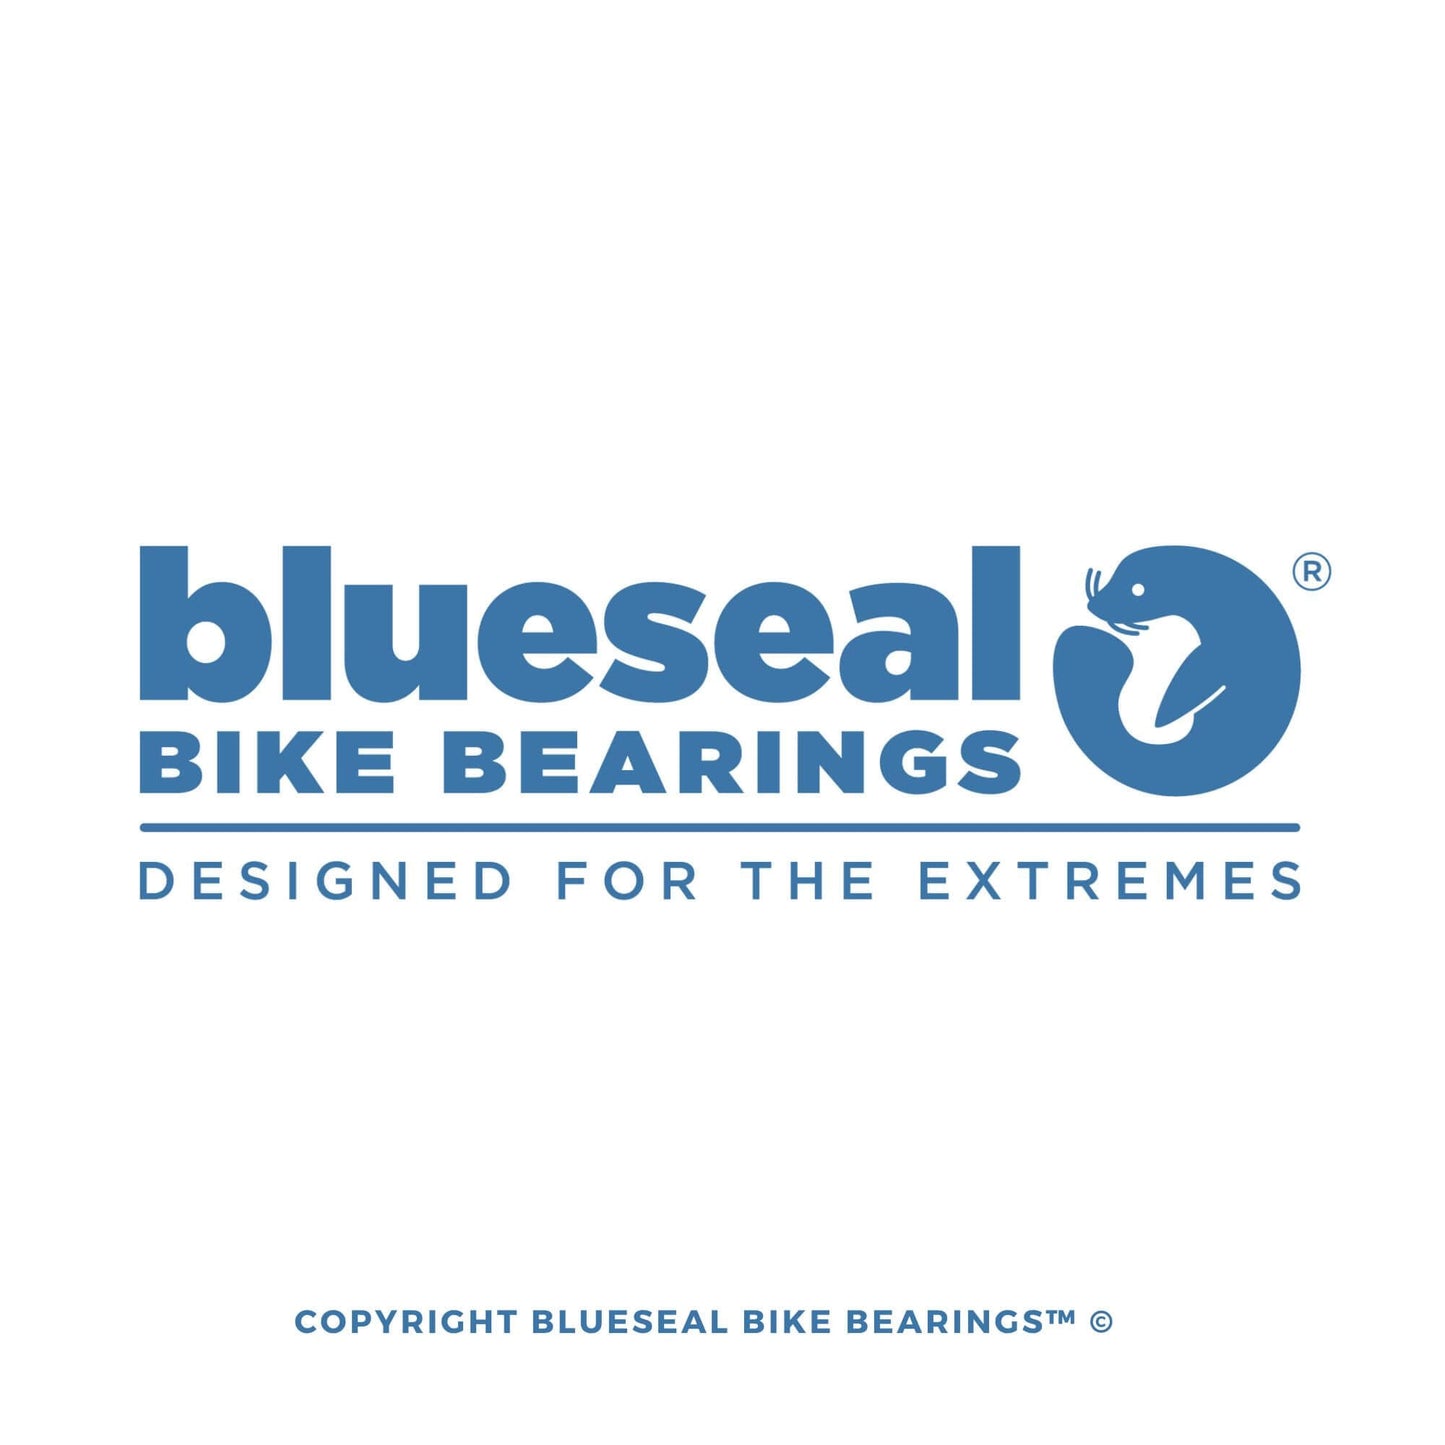 Cube Stereo Pivot Bearing Kit | Blueseal MAX Full Complement - Trailvision - Bicycle Bearing Suppliers